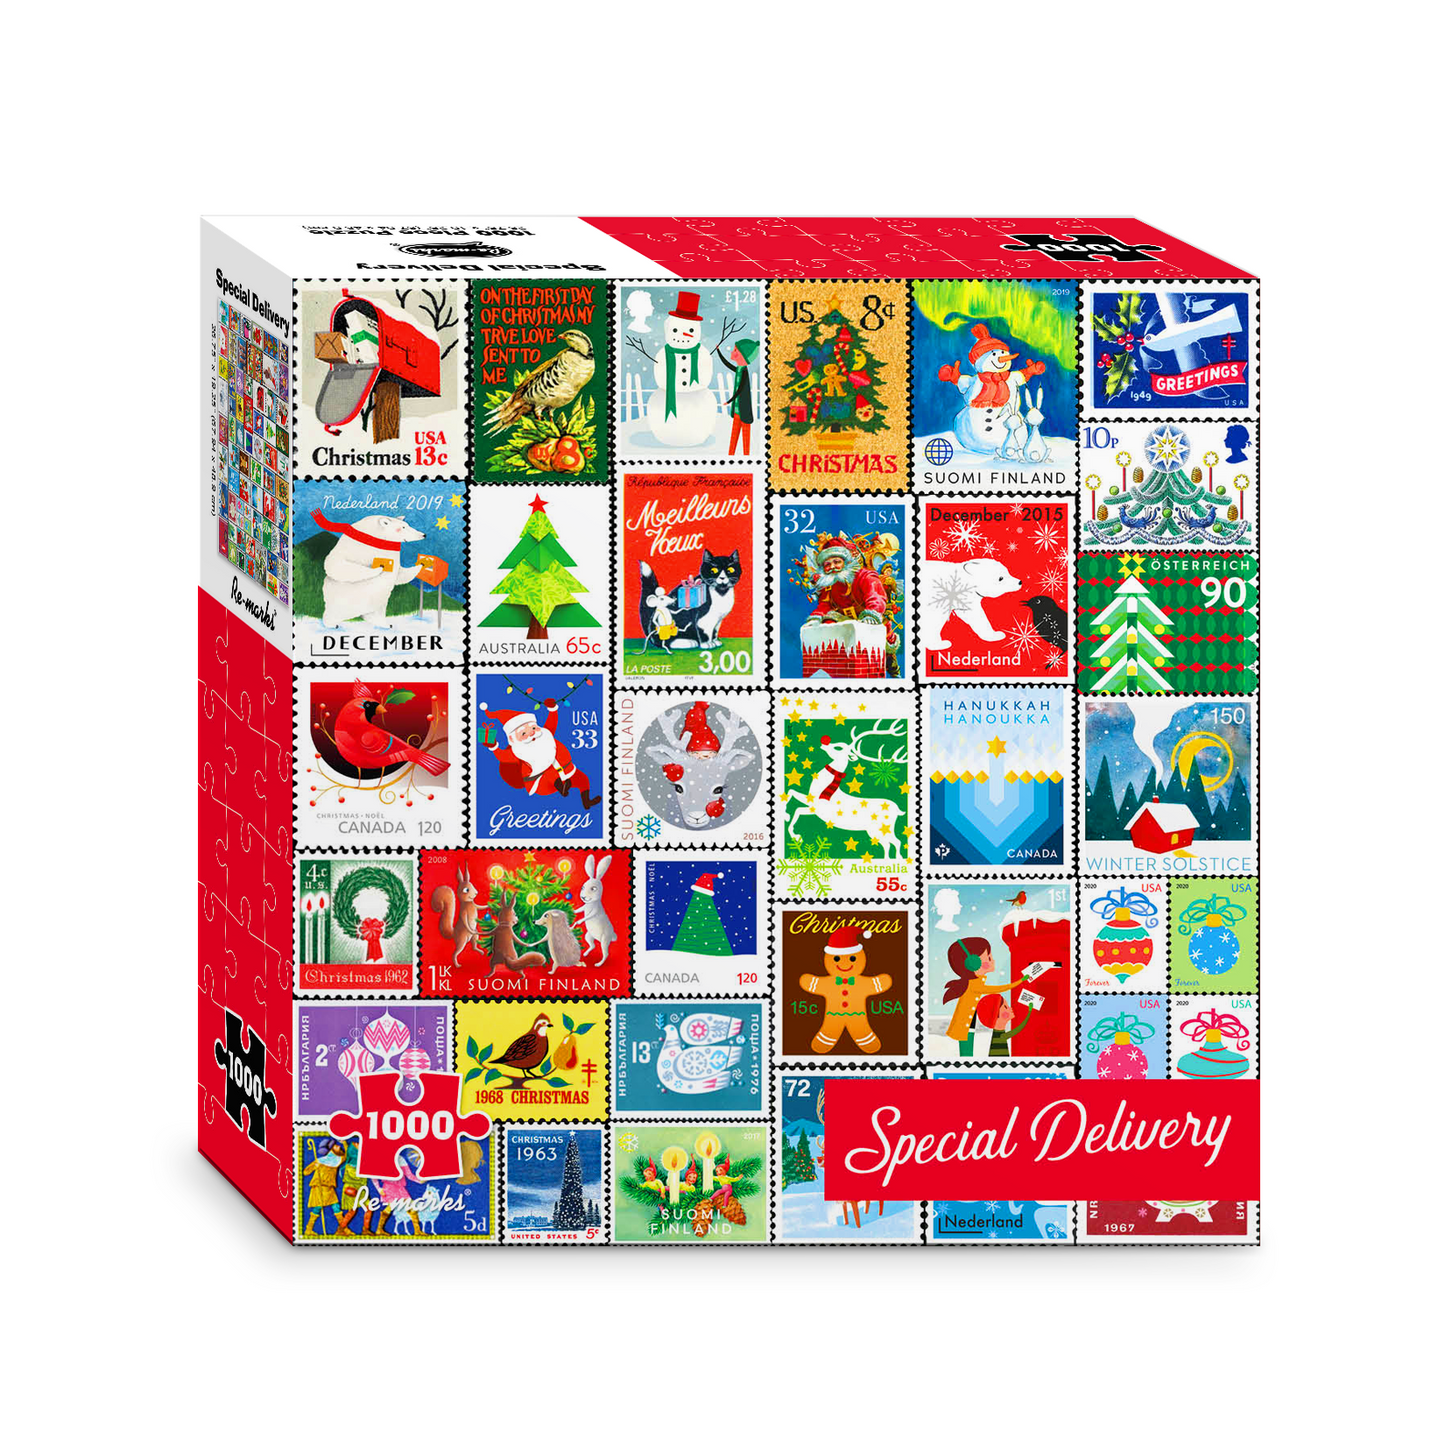 Special Delivery Stamp Collage 1000-Piece Jigsaw Puzzle